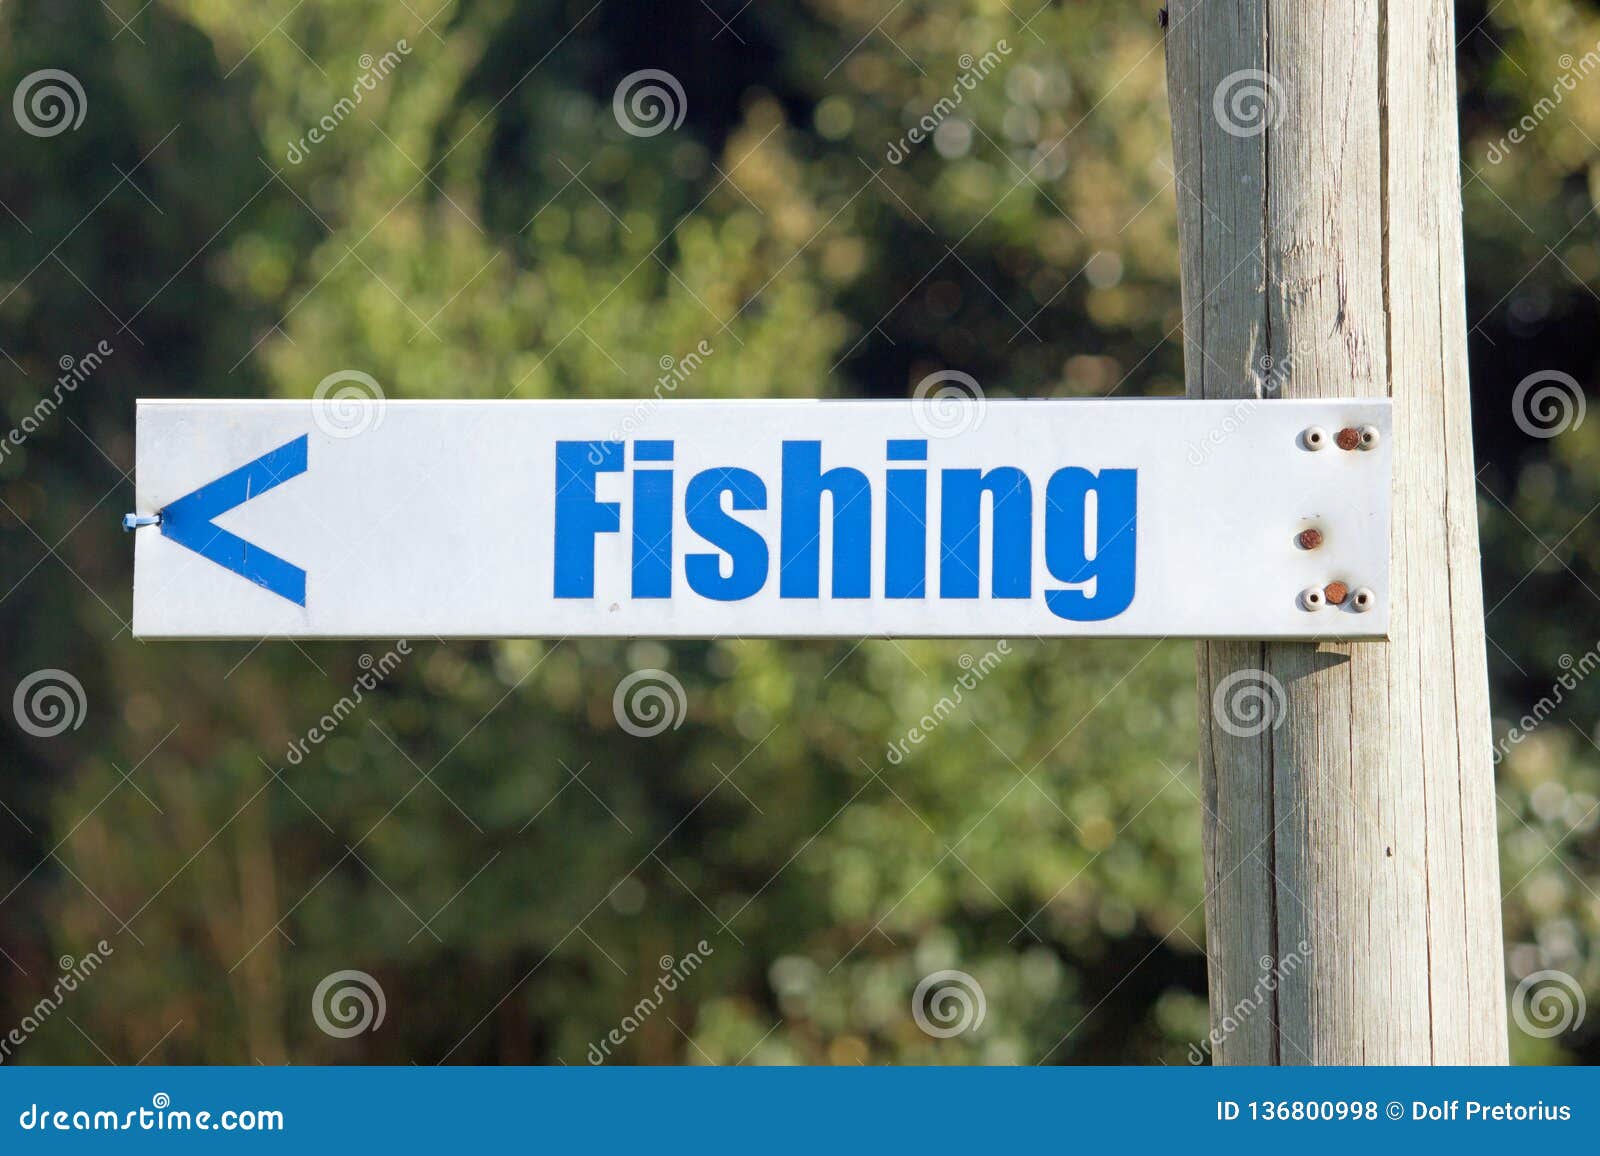 https://thumbs.dreamstime.com/z/direction-to-fishing-blue-printed-word-fishing-white-plastic-information-board-nailed-to-wooden-post-giving-direction-to-dam-136800998.jpg